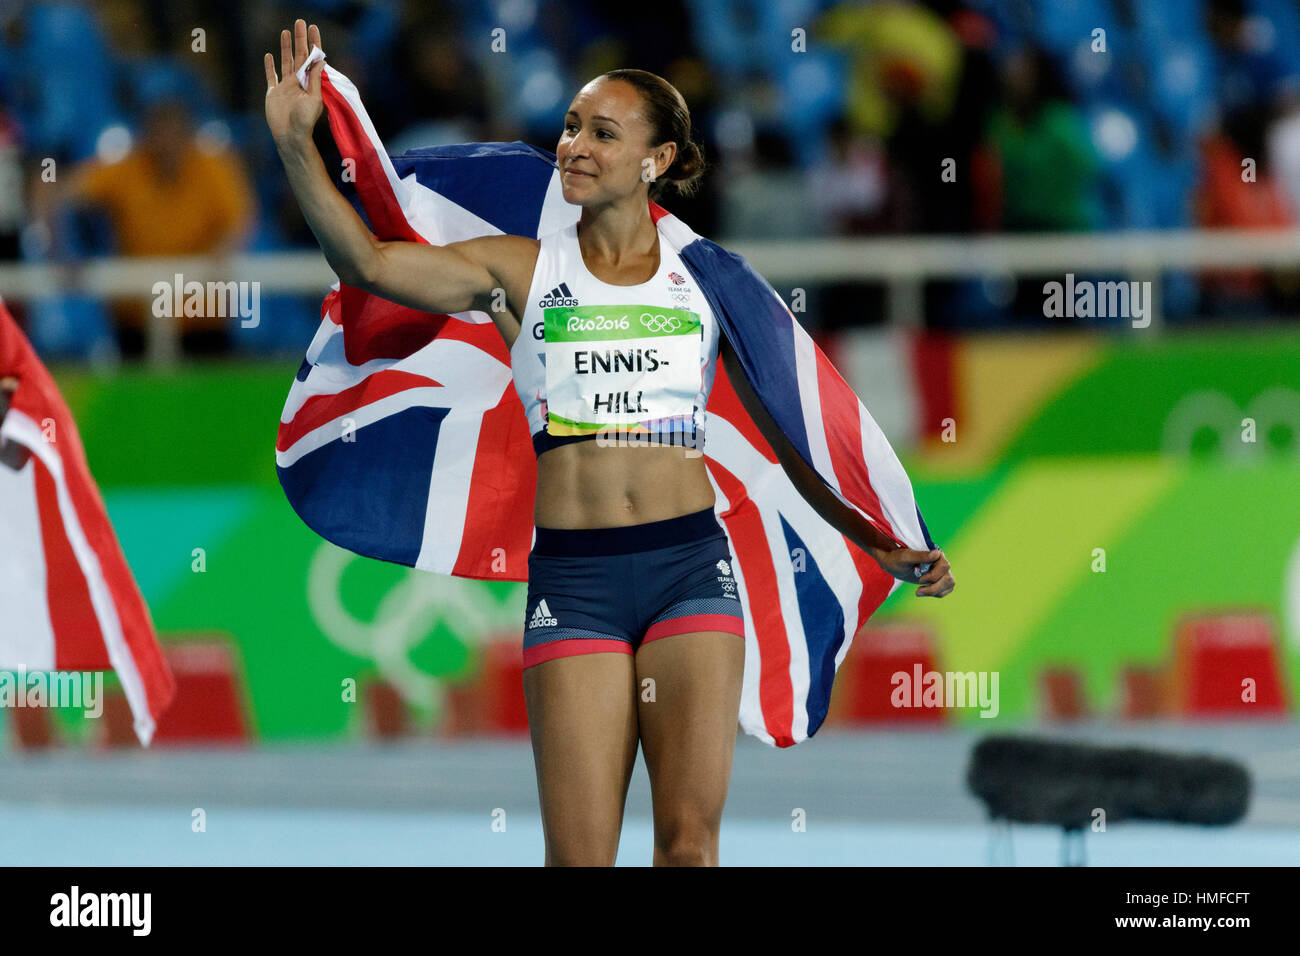 Rio de Janeiro, Brazil. 13 August 2016. Jessica Ennis-Hill (GBR) wins the silver medal in the Heptathlon at the 2016 Olympic Summer Games. ©Paul J. Su Stock Photo